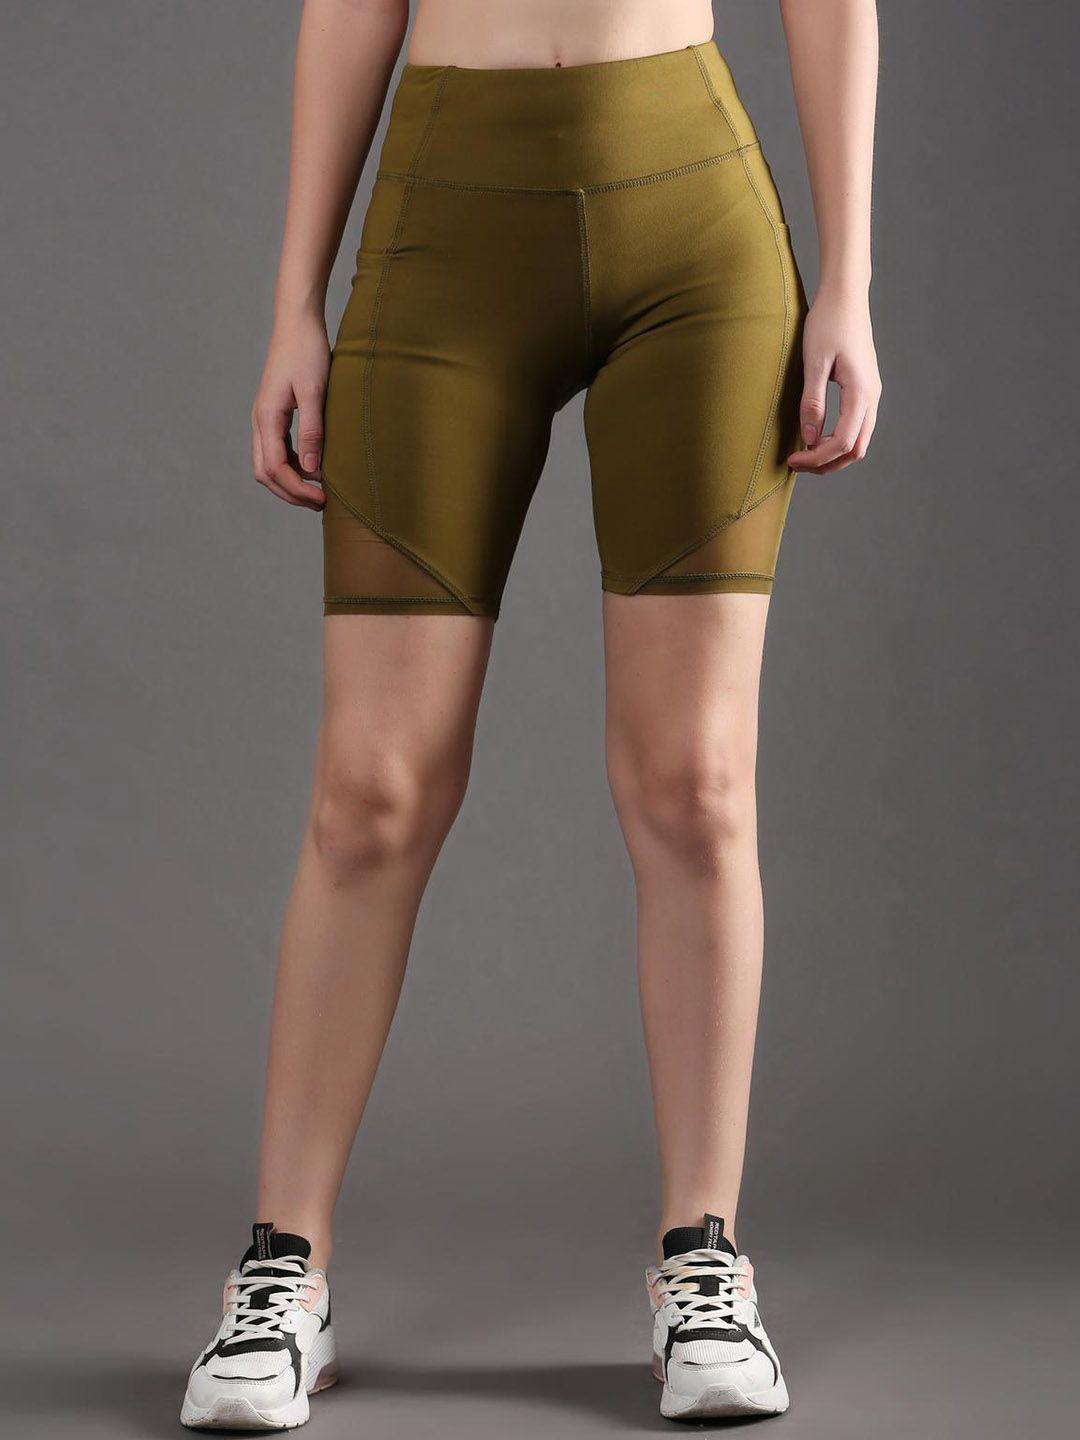 the dance bible women olive green slim fit high-rise outdoor sports shorts with antimicrobial technology